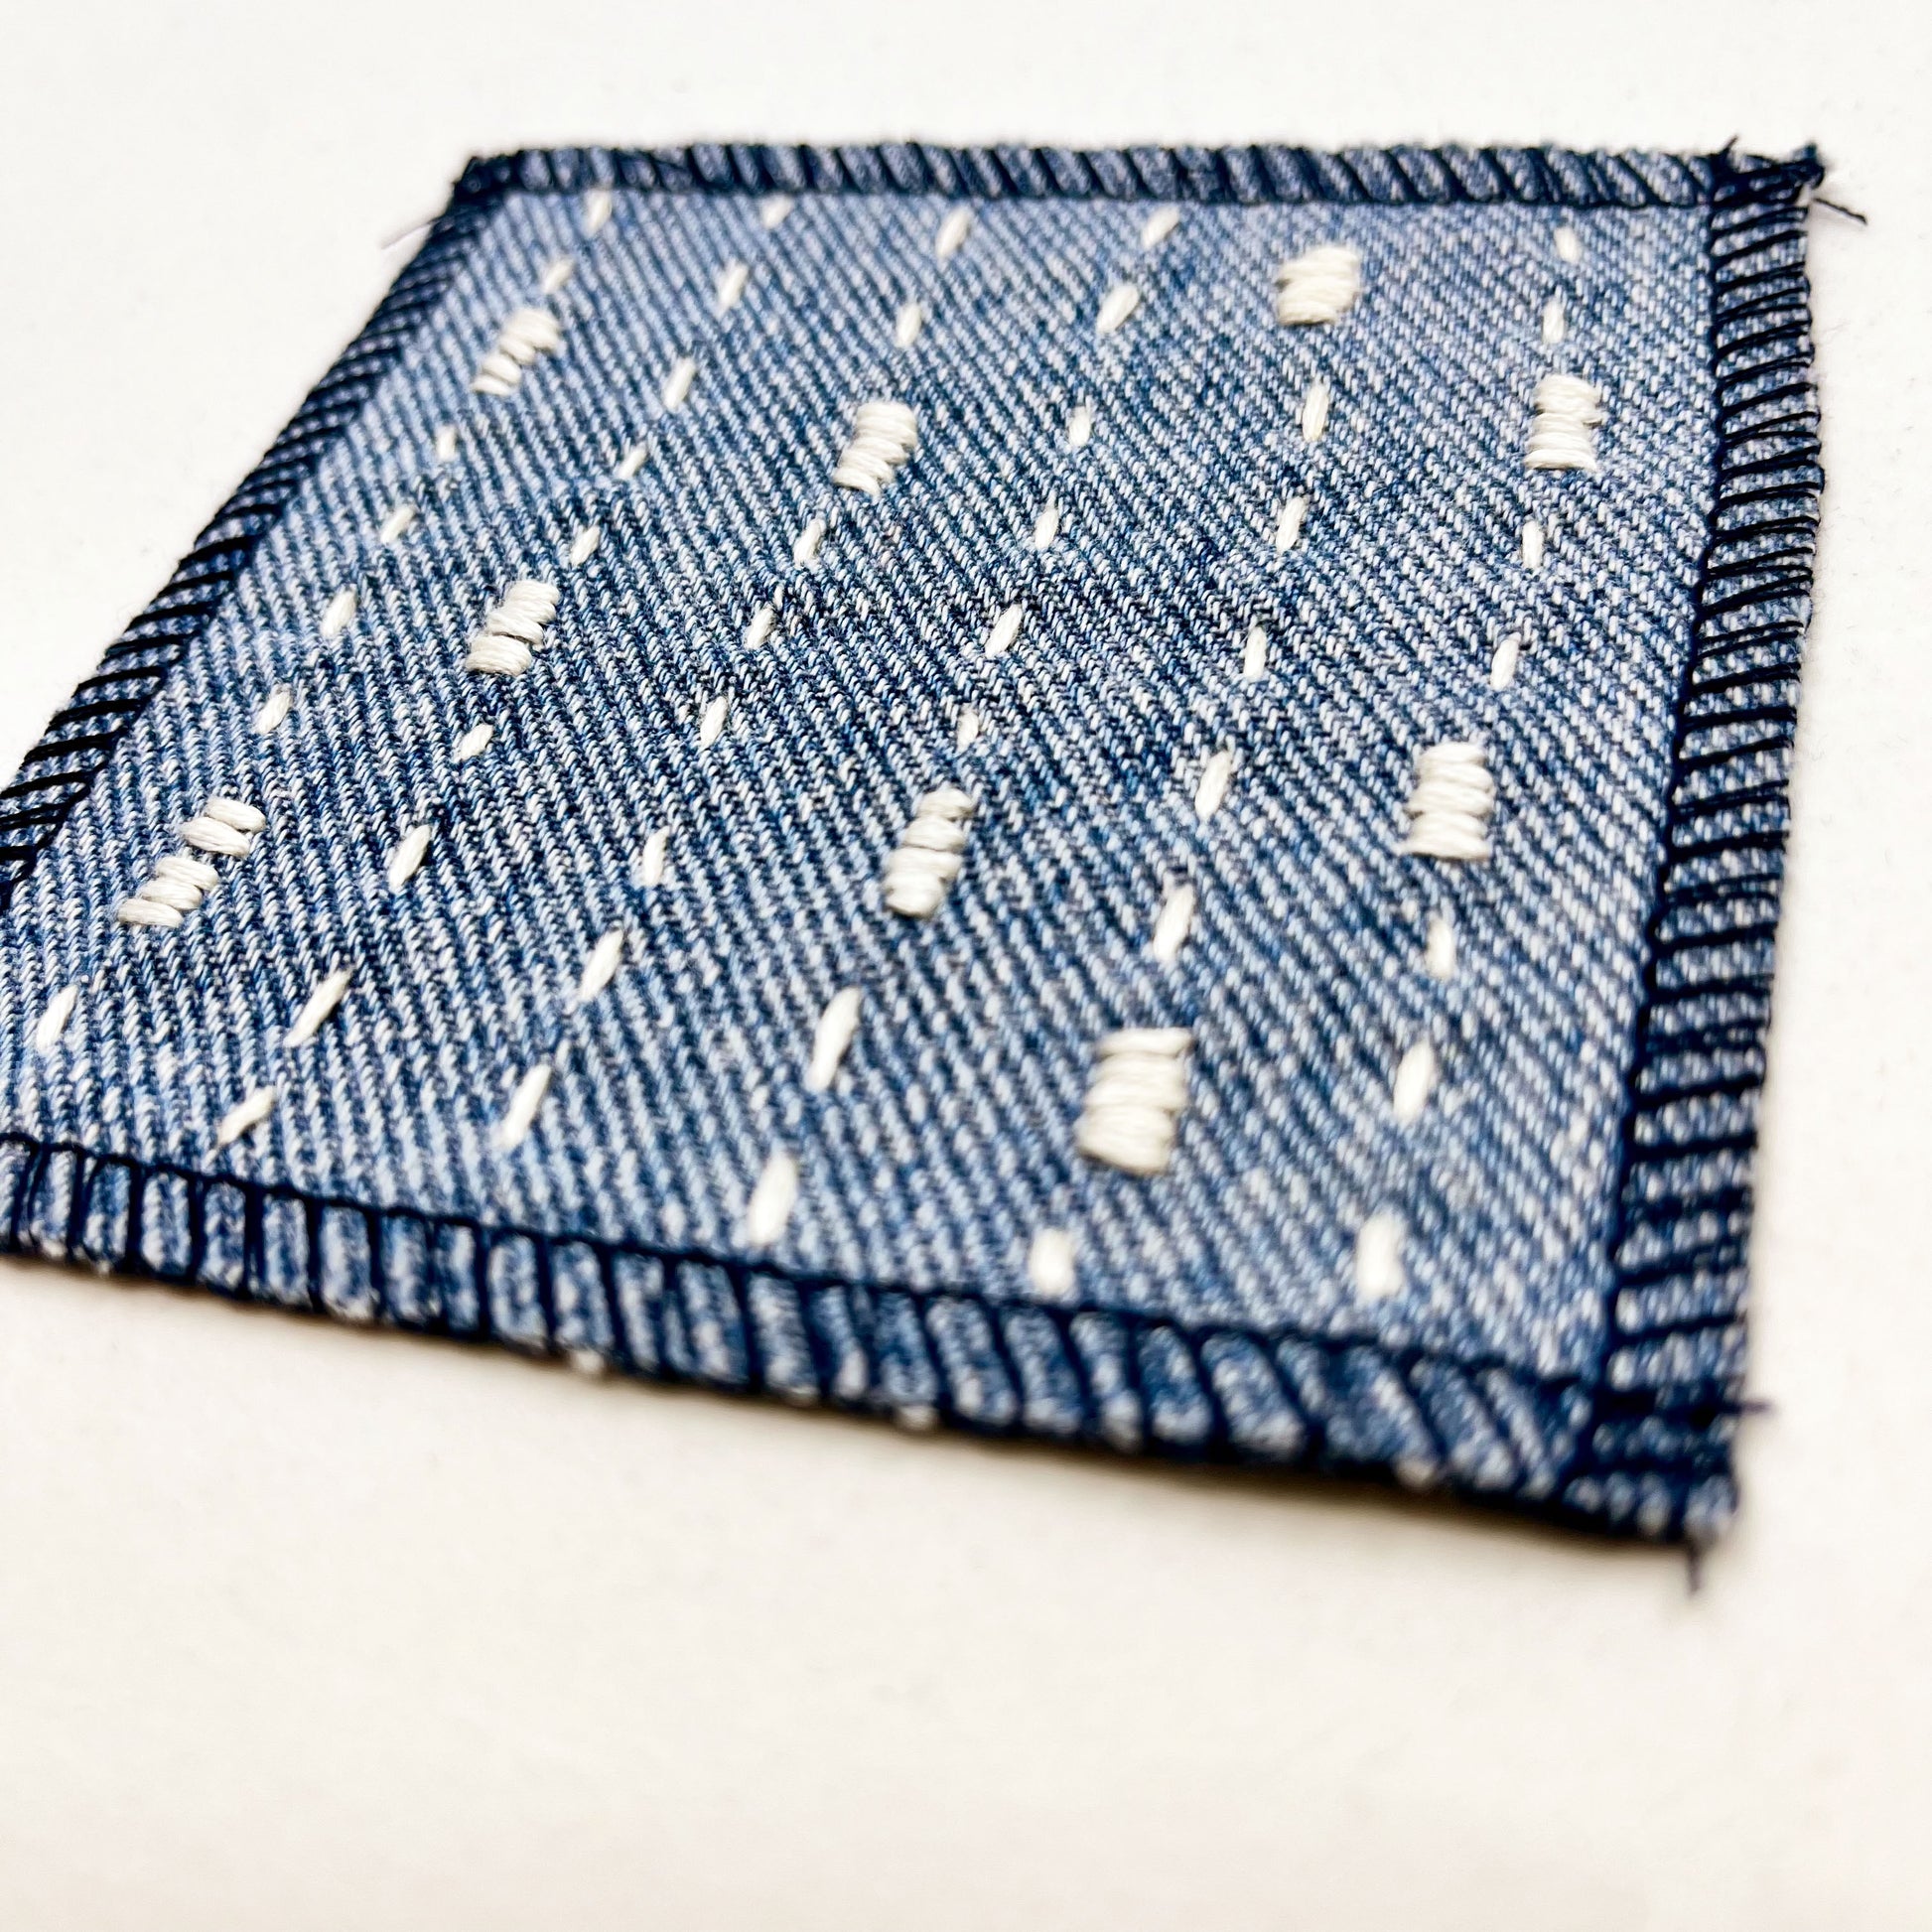 close up angled view of a square patch made out of denim, handstitched with ivory running stitches with randomly placed small rectangles made of stitches running the other direction, with overlocked edges, on a white background